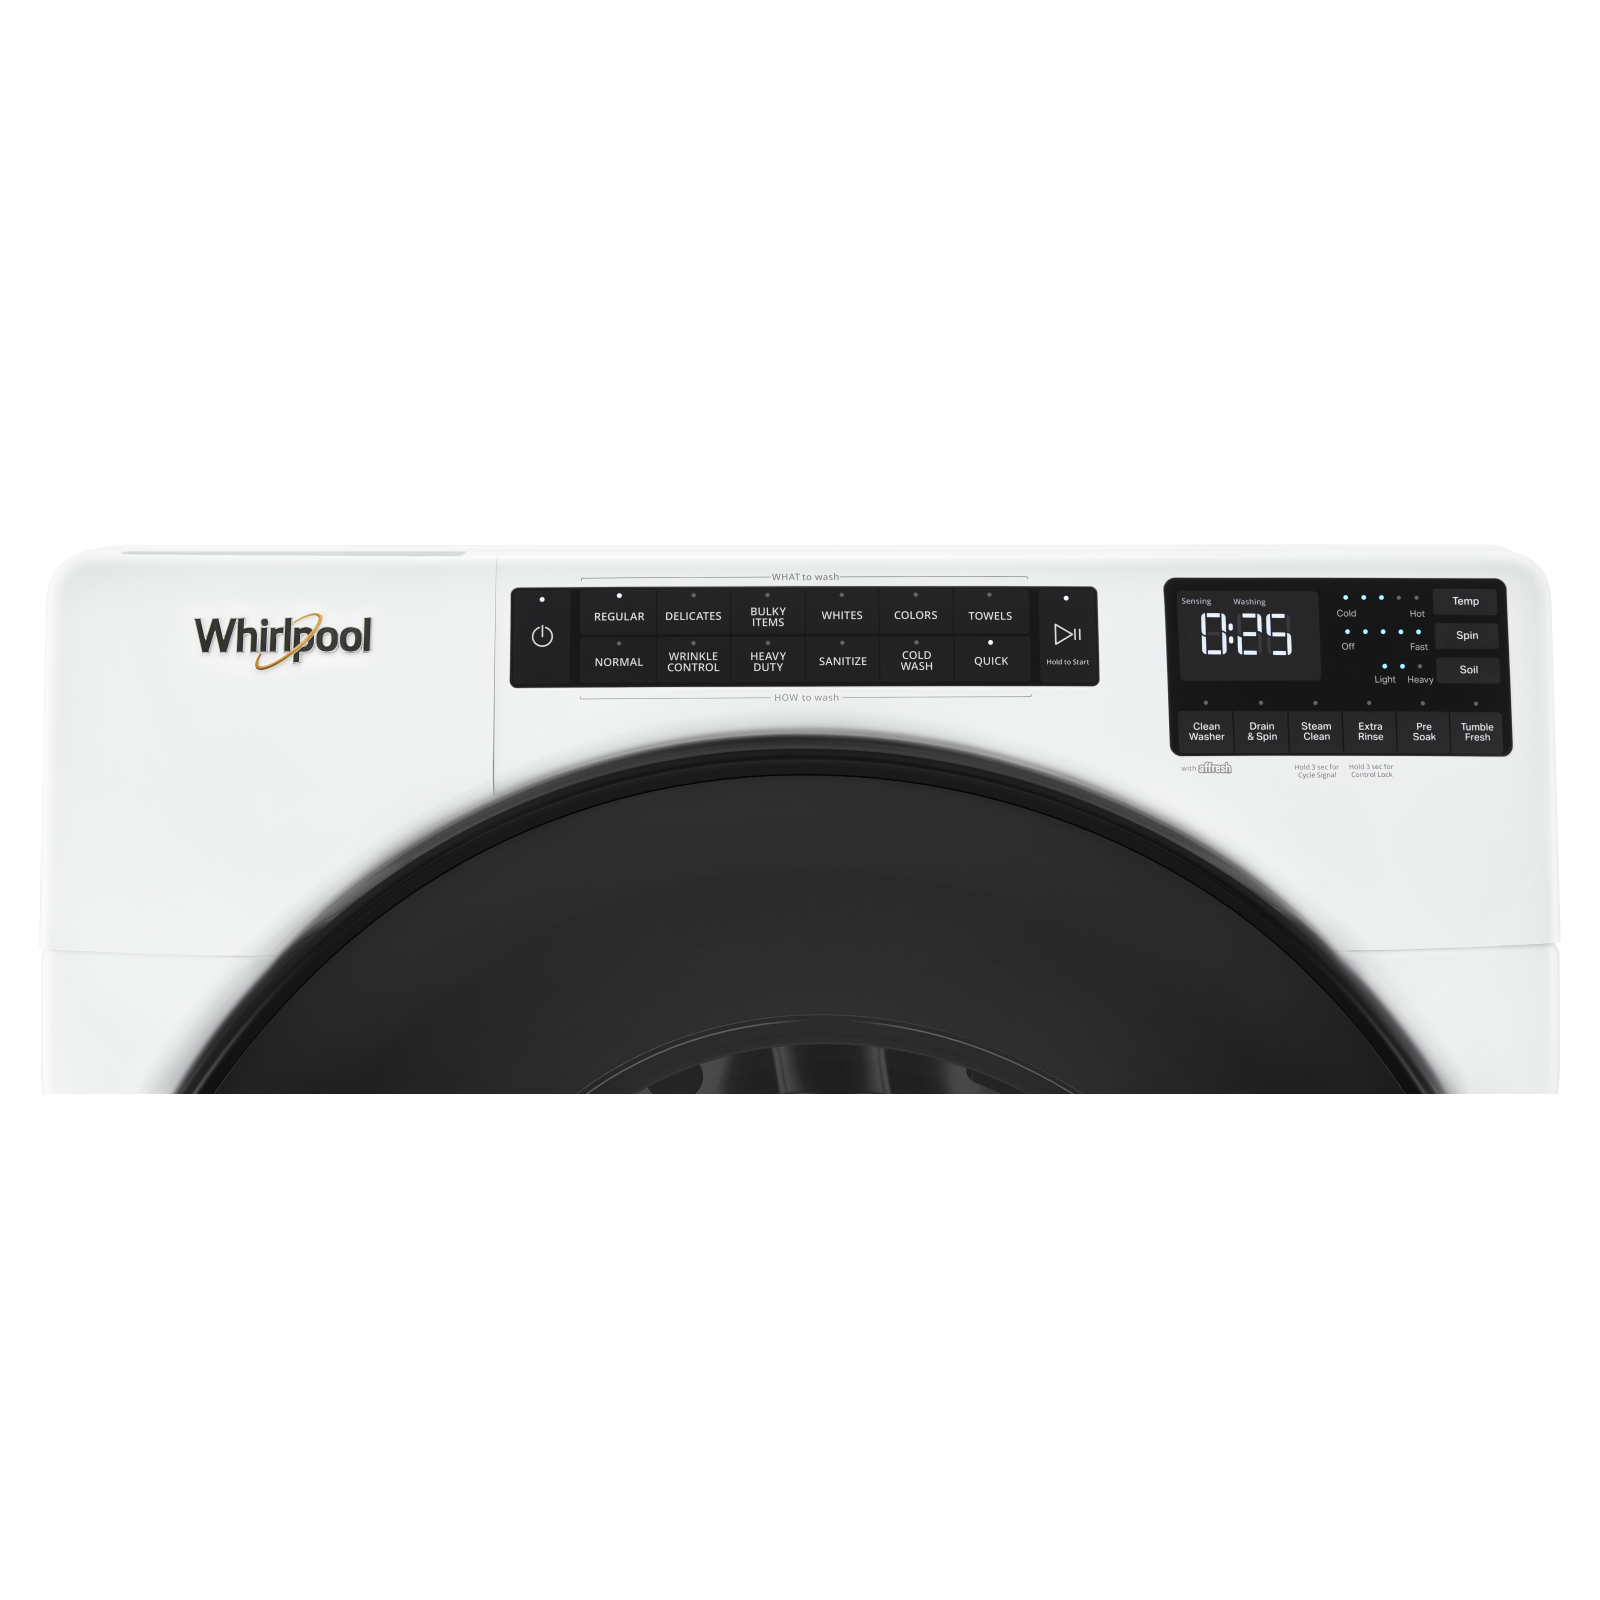 Whirlpool - 5.2 cu. Ft  Front Load Washer in White - WFW5605MW